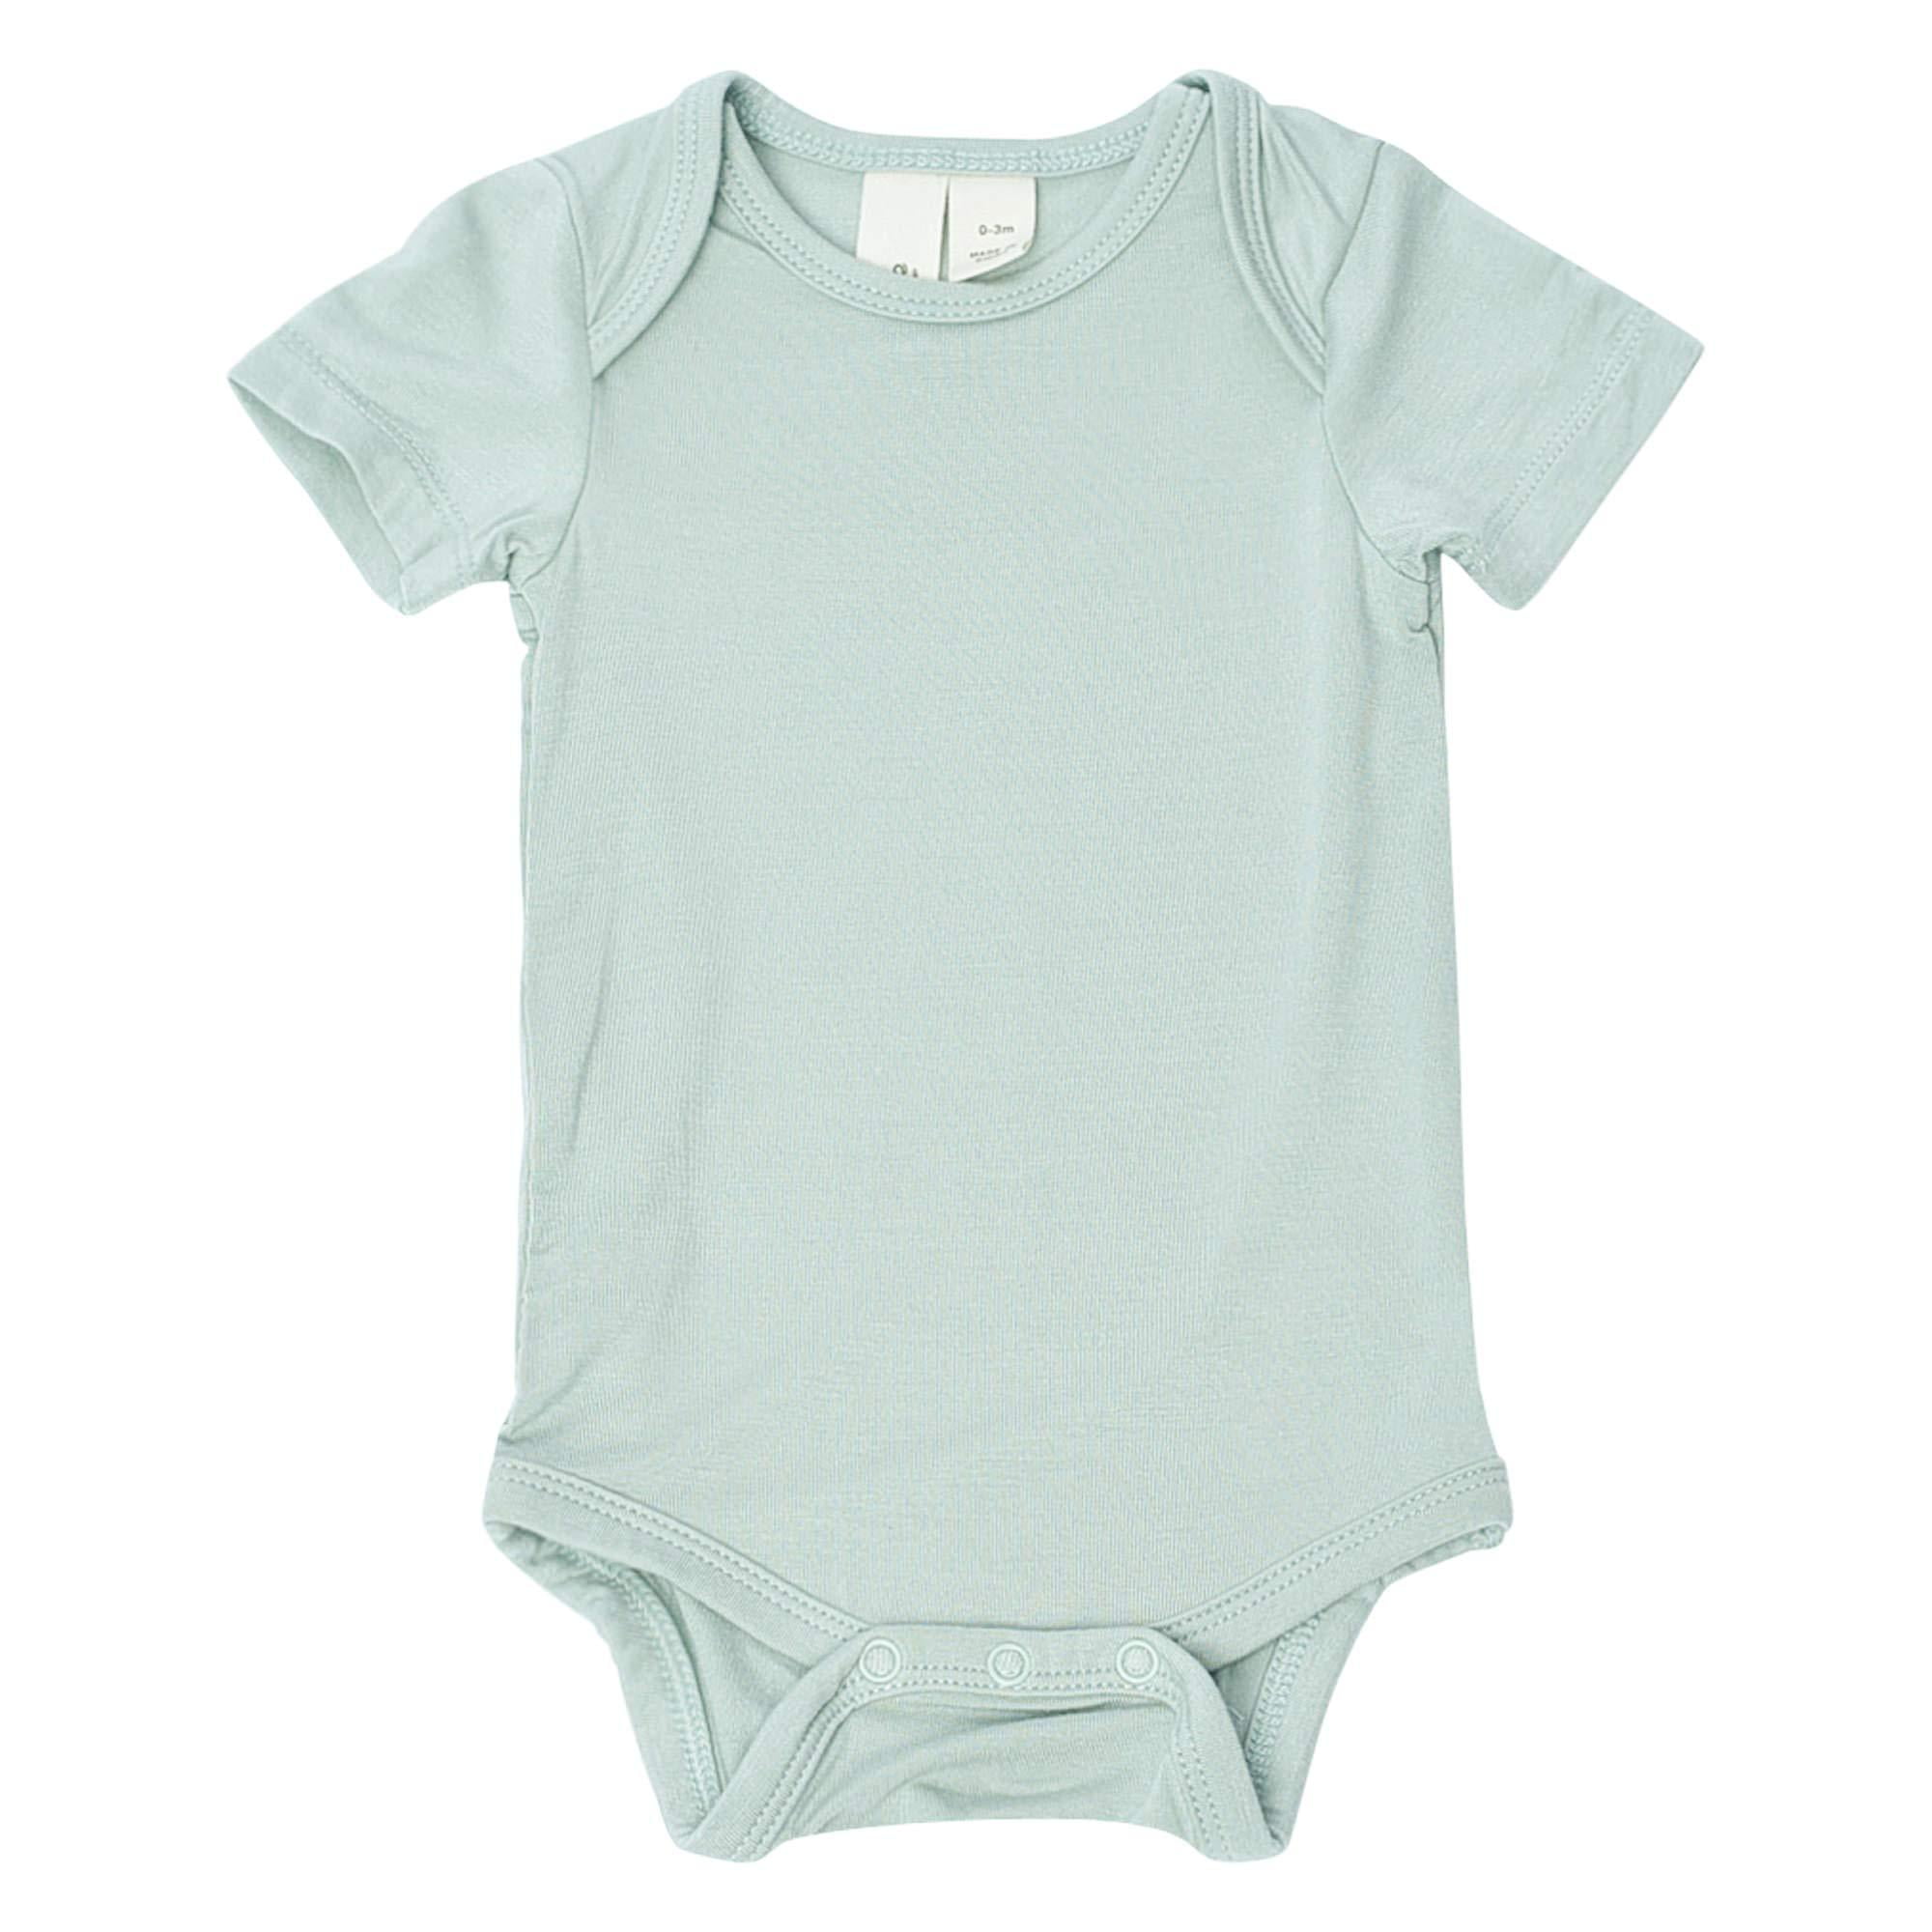 3-6 Months, Midnight KYTE BABY Short Sleeve Unisex Baby Bodysuits Made from Soft Bamboo Rayon Material